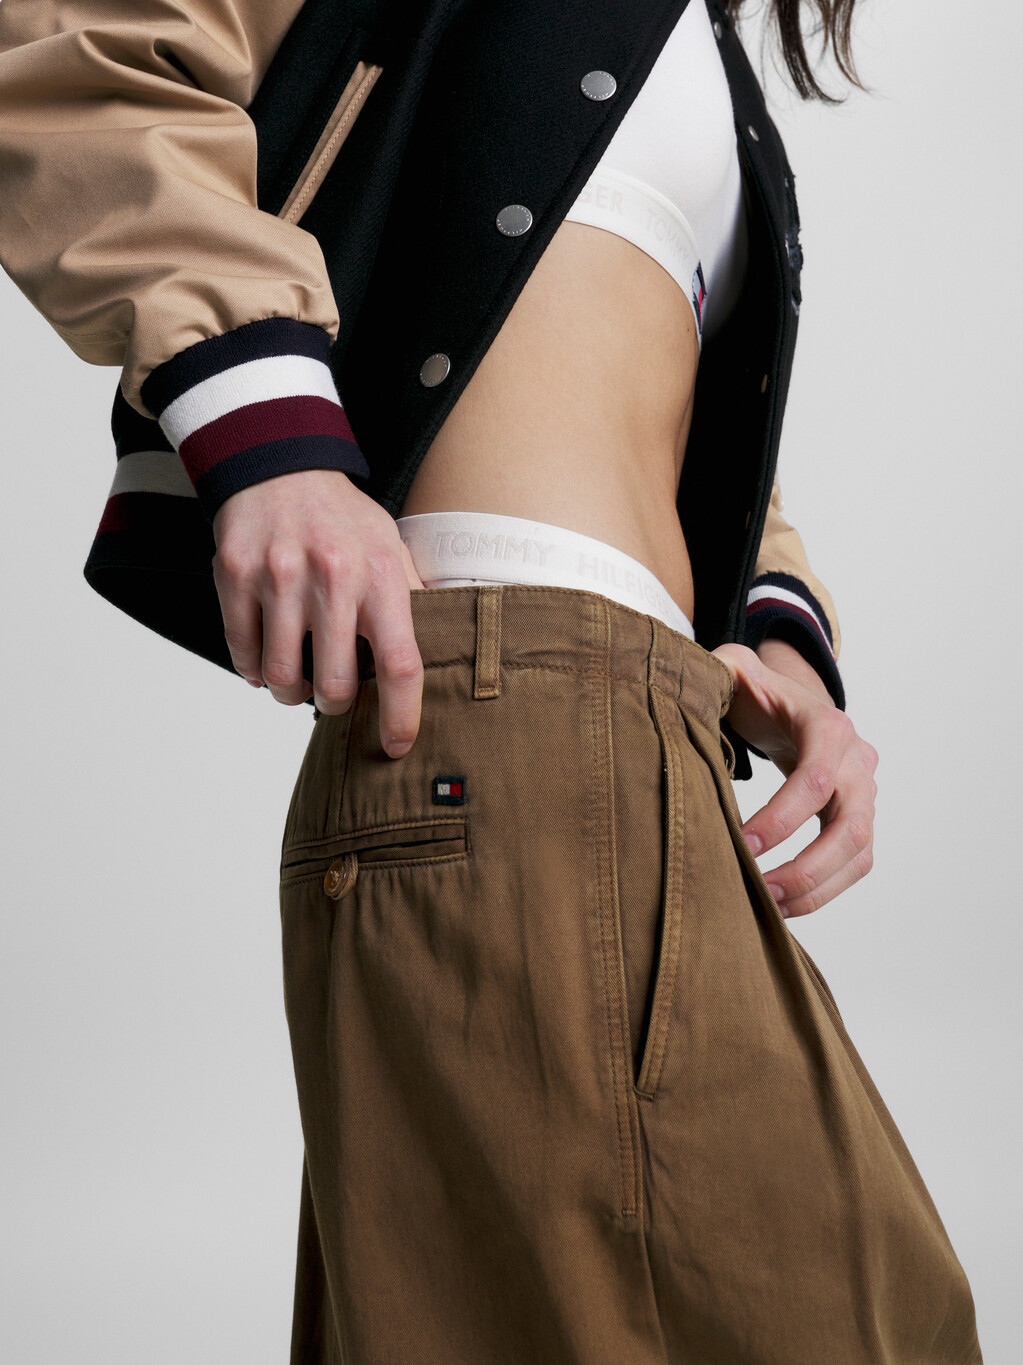 Tommy Hilfiger X Shawn Mendes Pleated Trousers, Countryside Khaki, hi-res